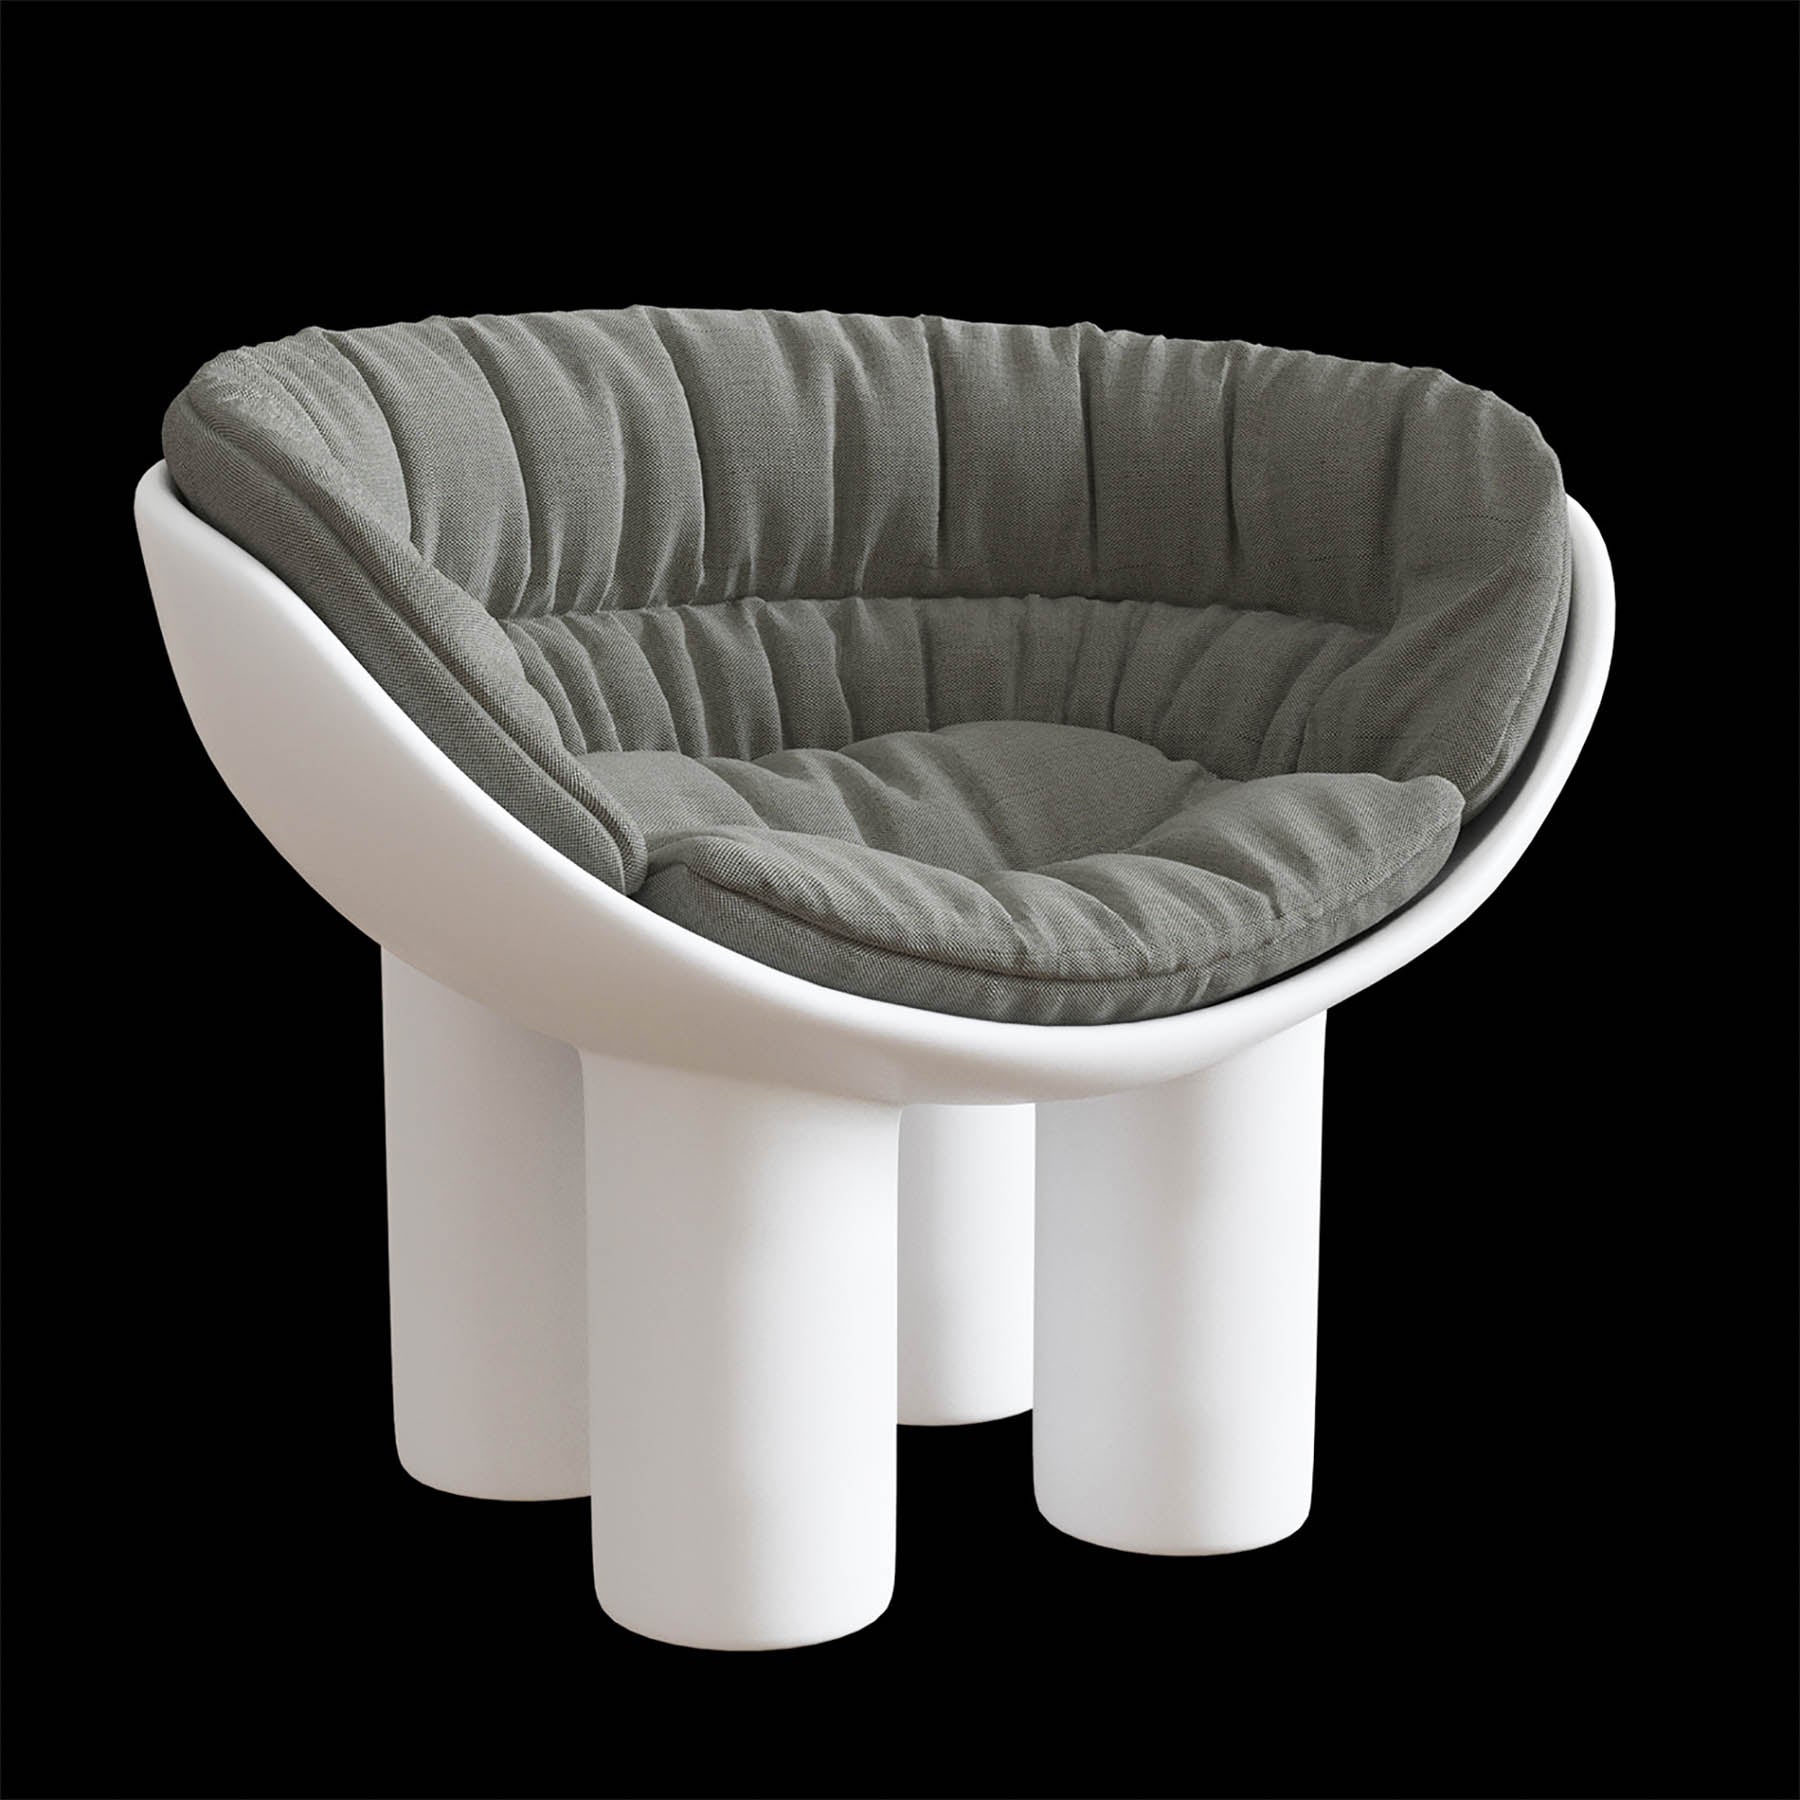 Replica Roly Poly Chair - White